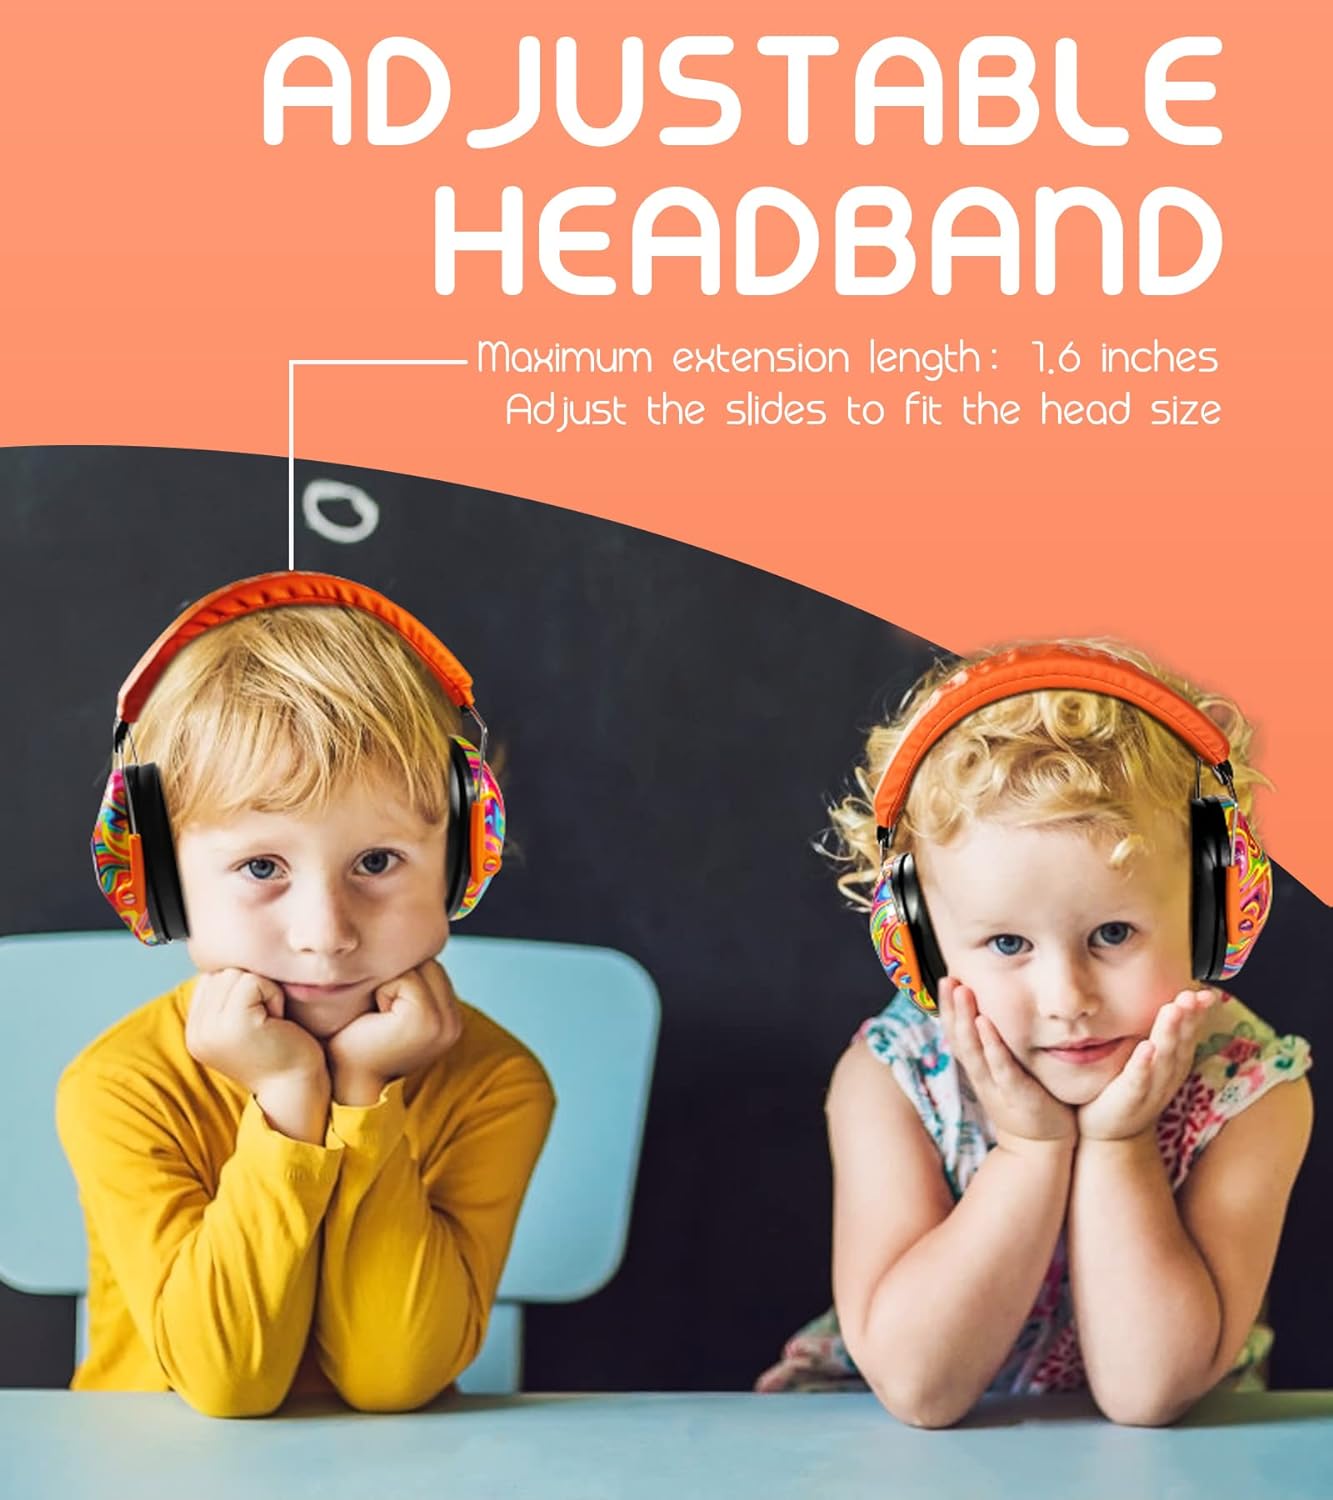 PROHEAR 032 2 Pack Kids Ear Protection, NRR 25dB, Adjustable Headband Safety Earmuffs for Sports Events, Concerts, Airports